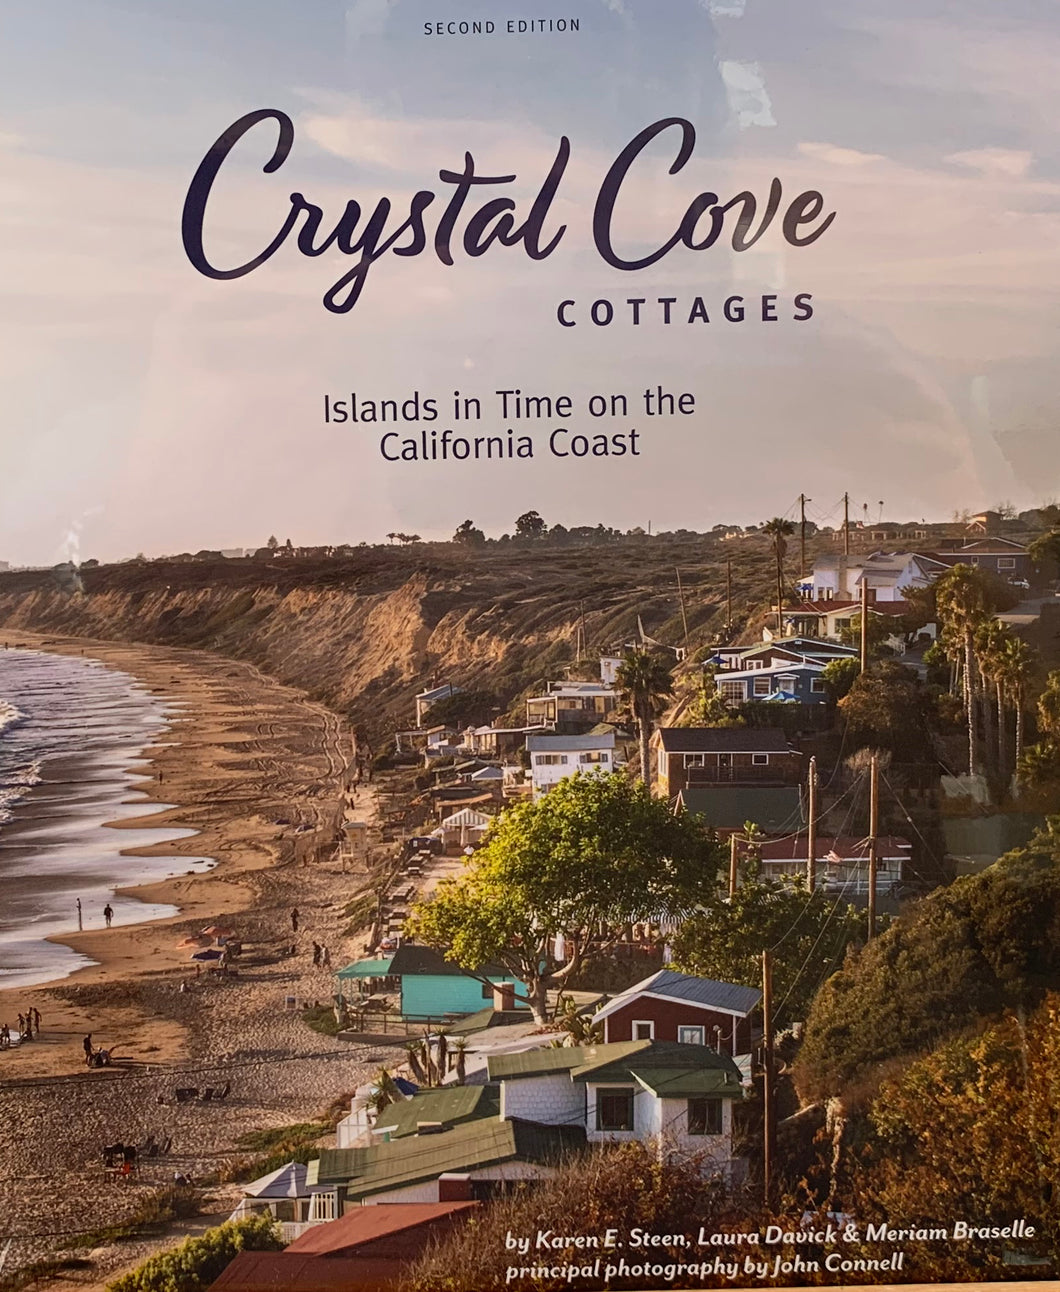 Crystal Cove Cottages: Islands in Time on the California Coast, Second Edition